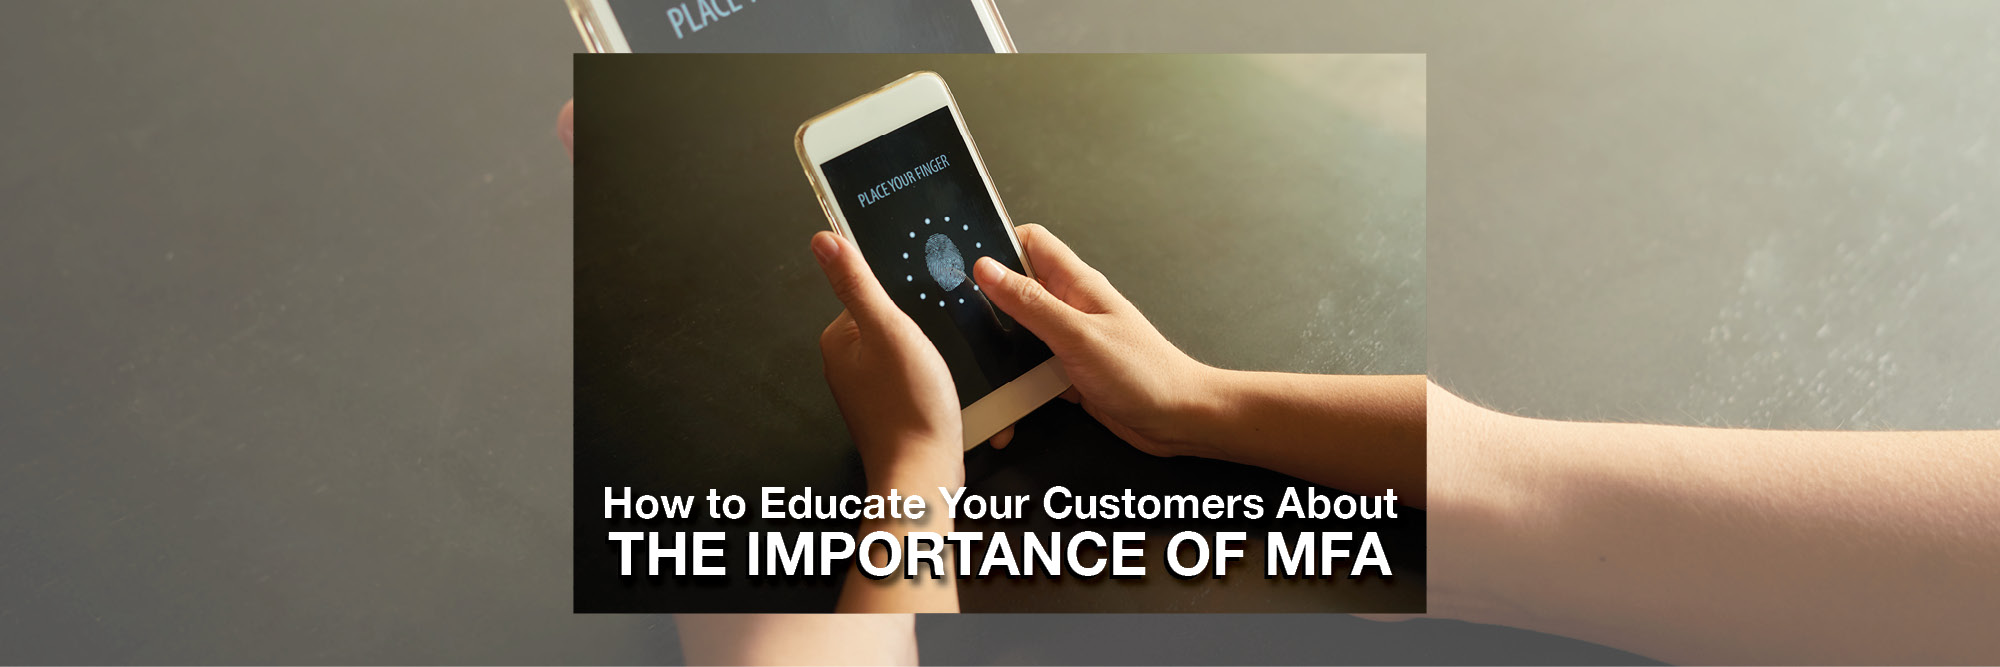 How to Educate Your Customers About the Importance of MFA